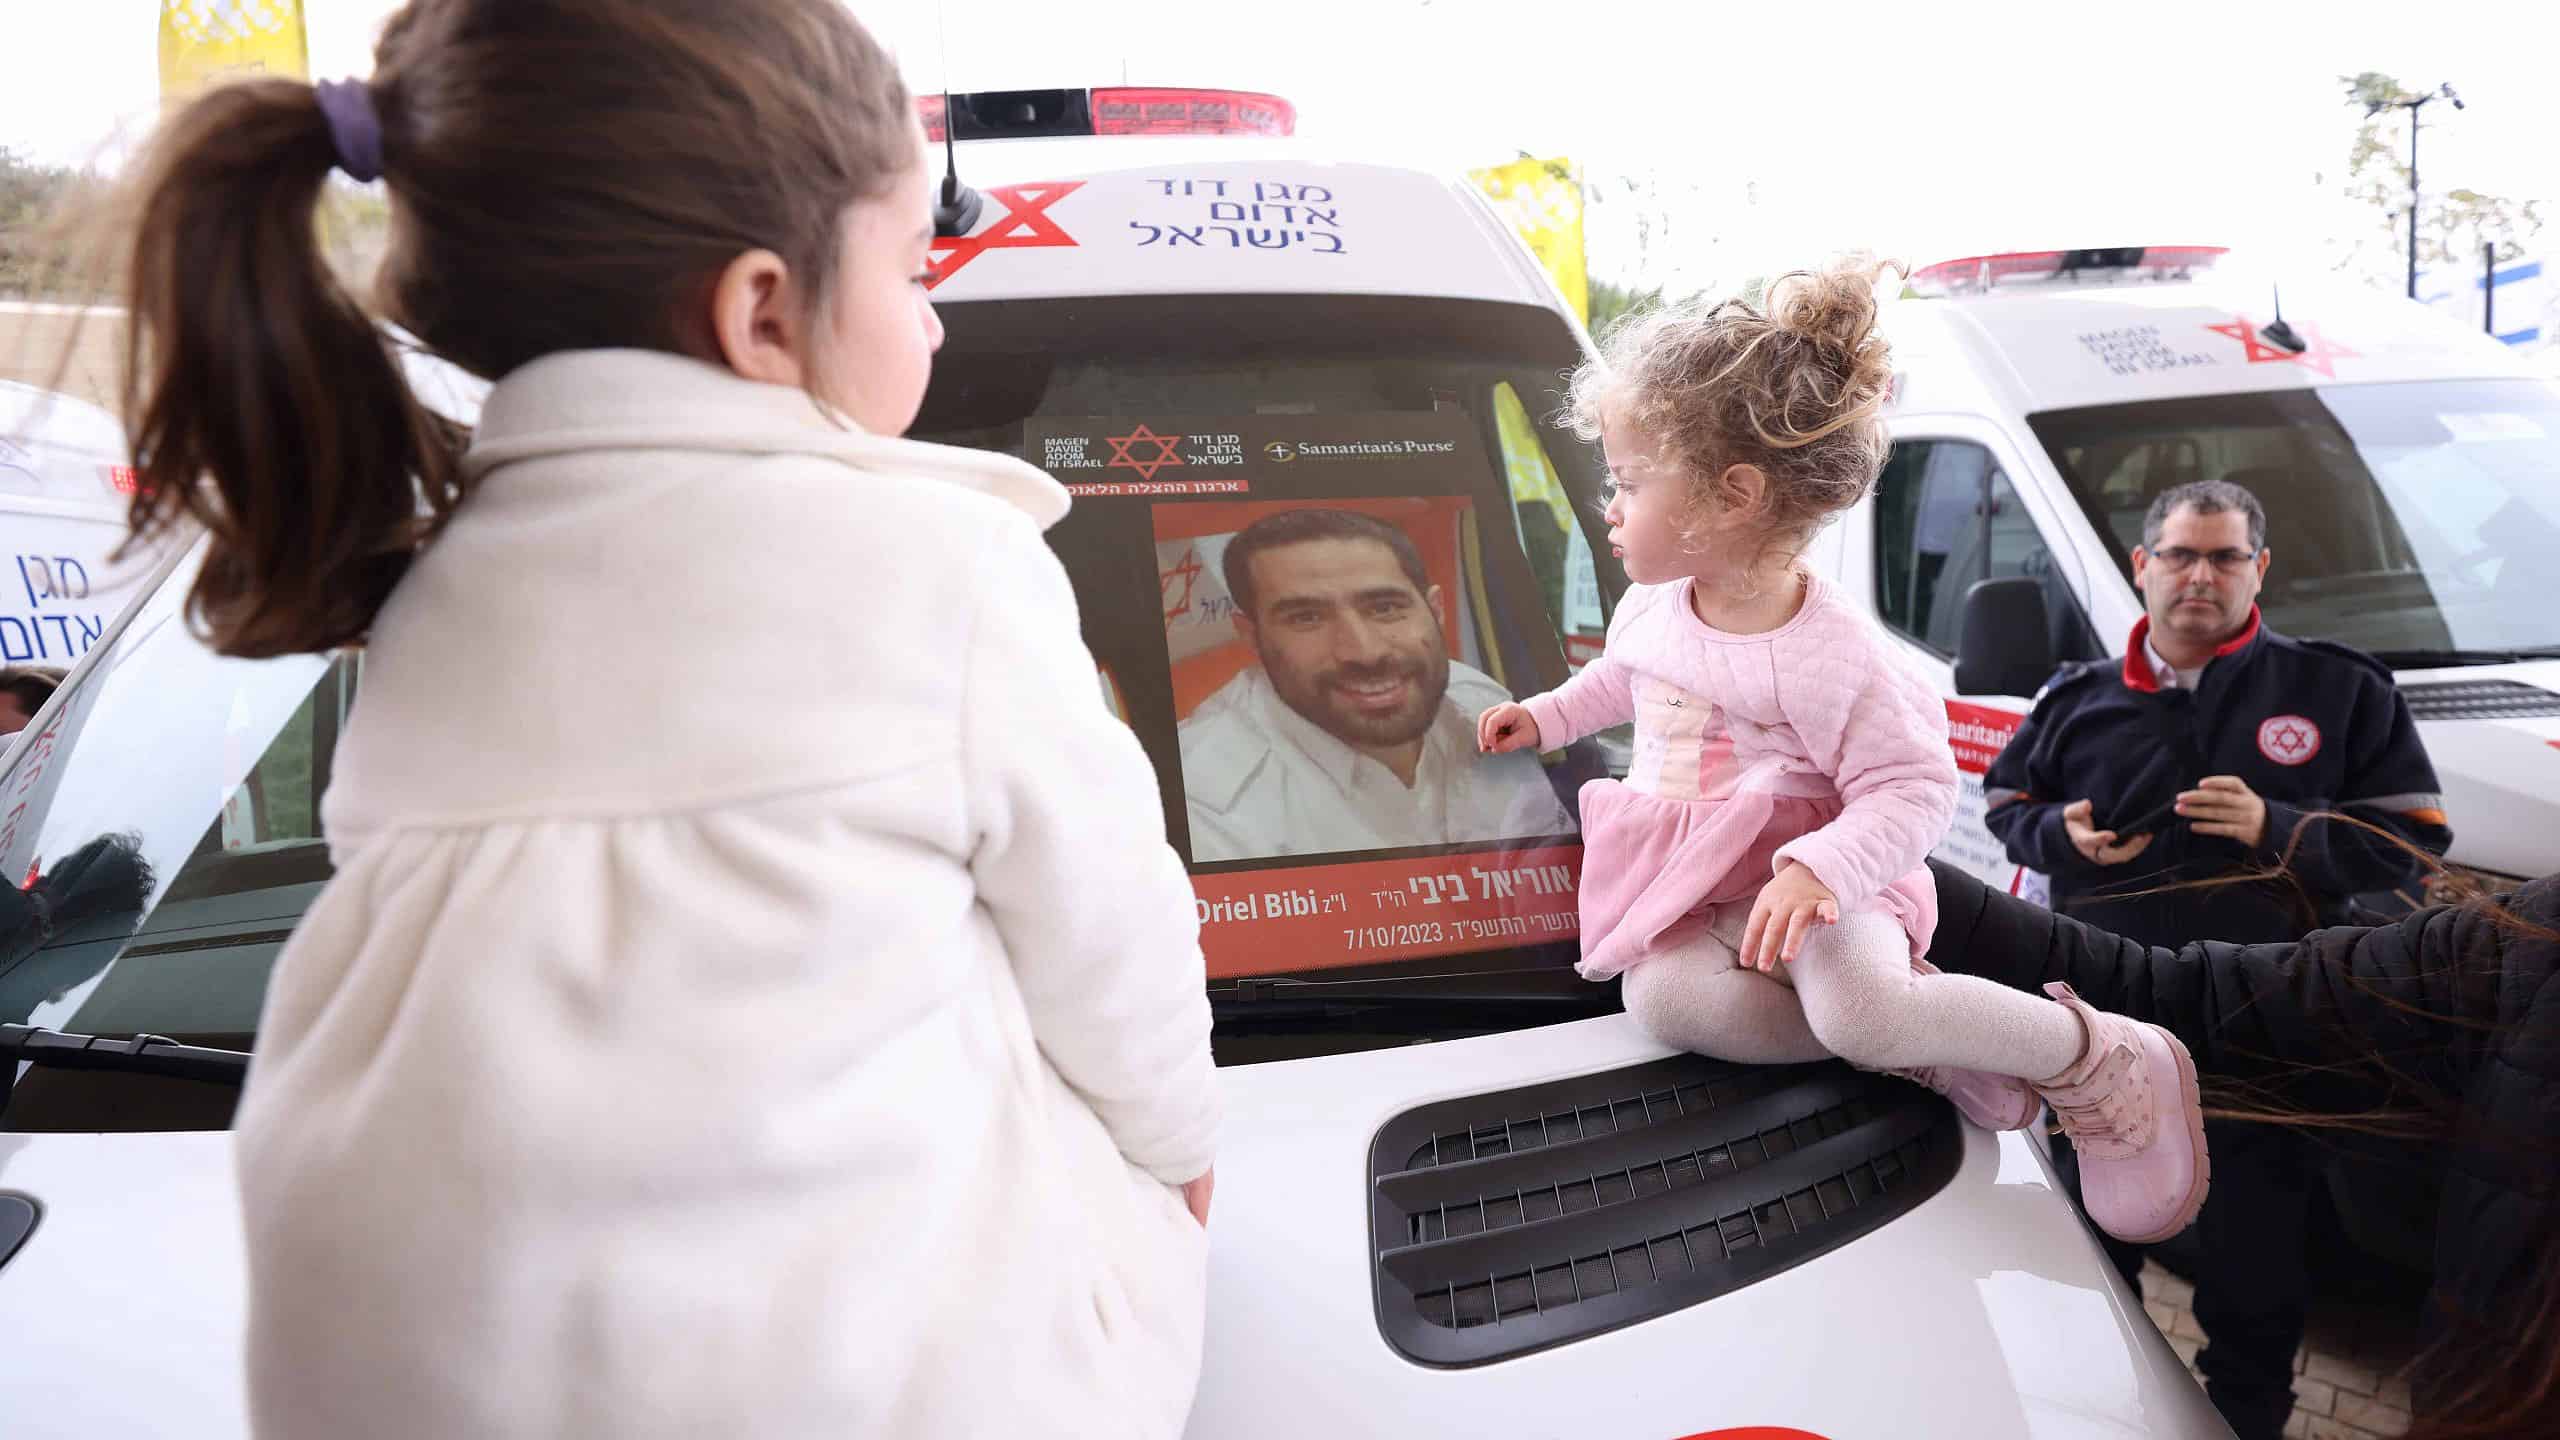 The children of MDA paramedic Oriel Bibi who fell in active service at the dedication of an ambulance in his memory donated by Samaritans Purse. Credit Eastside Studio scaled